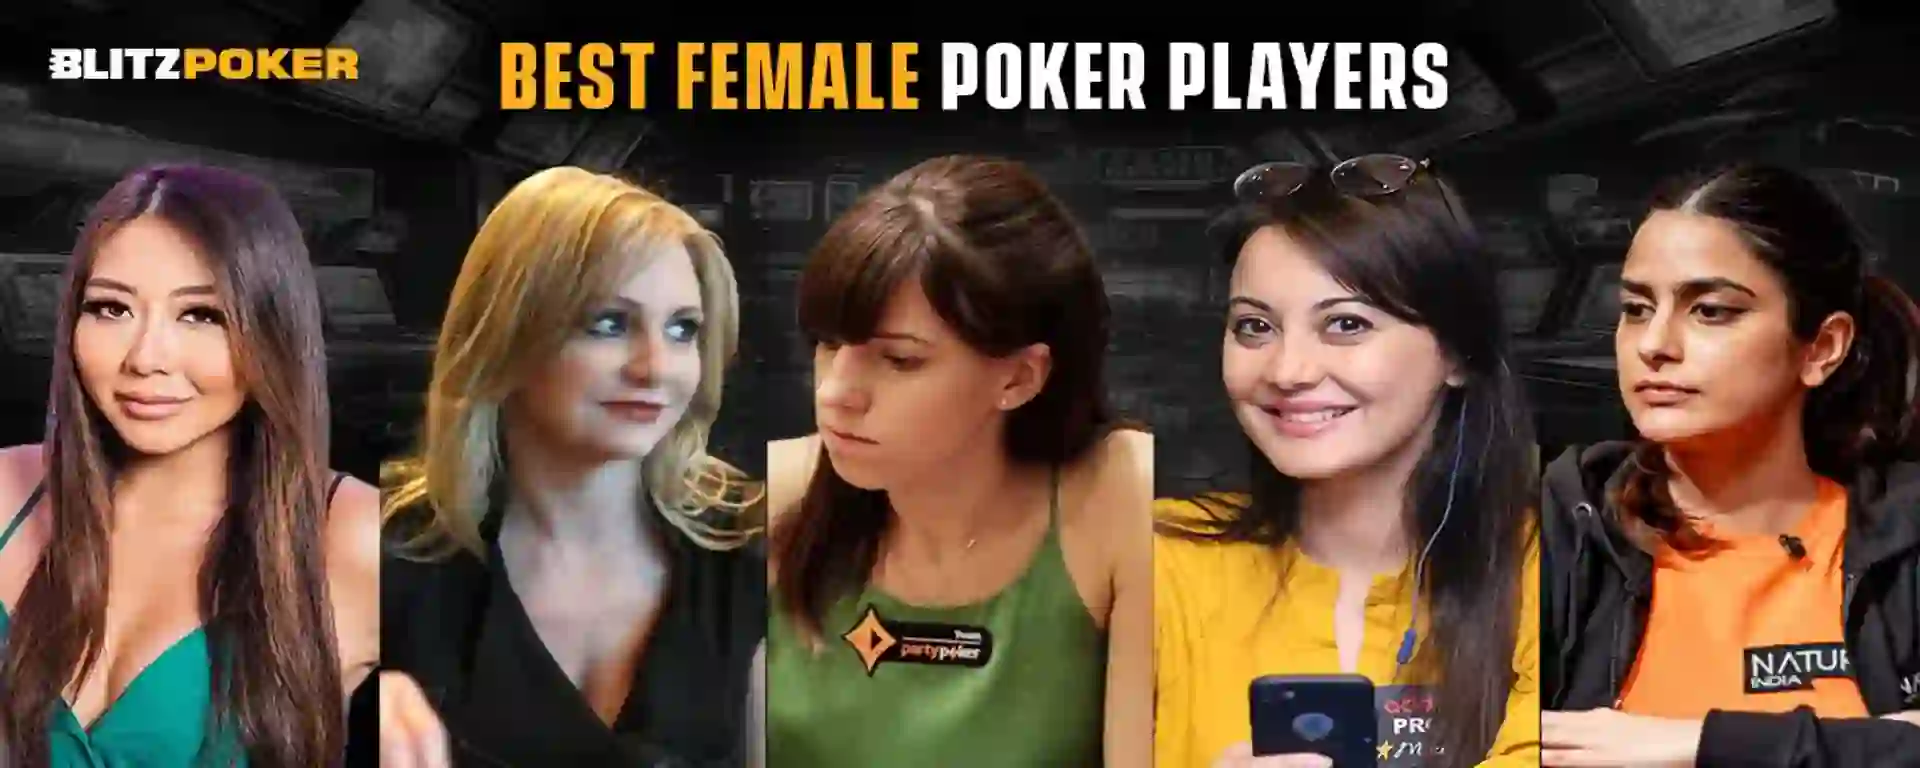 The best female poker players in the world: titles and big wins